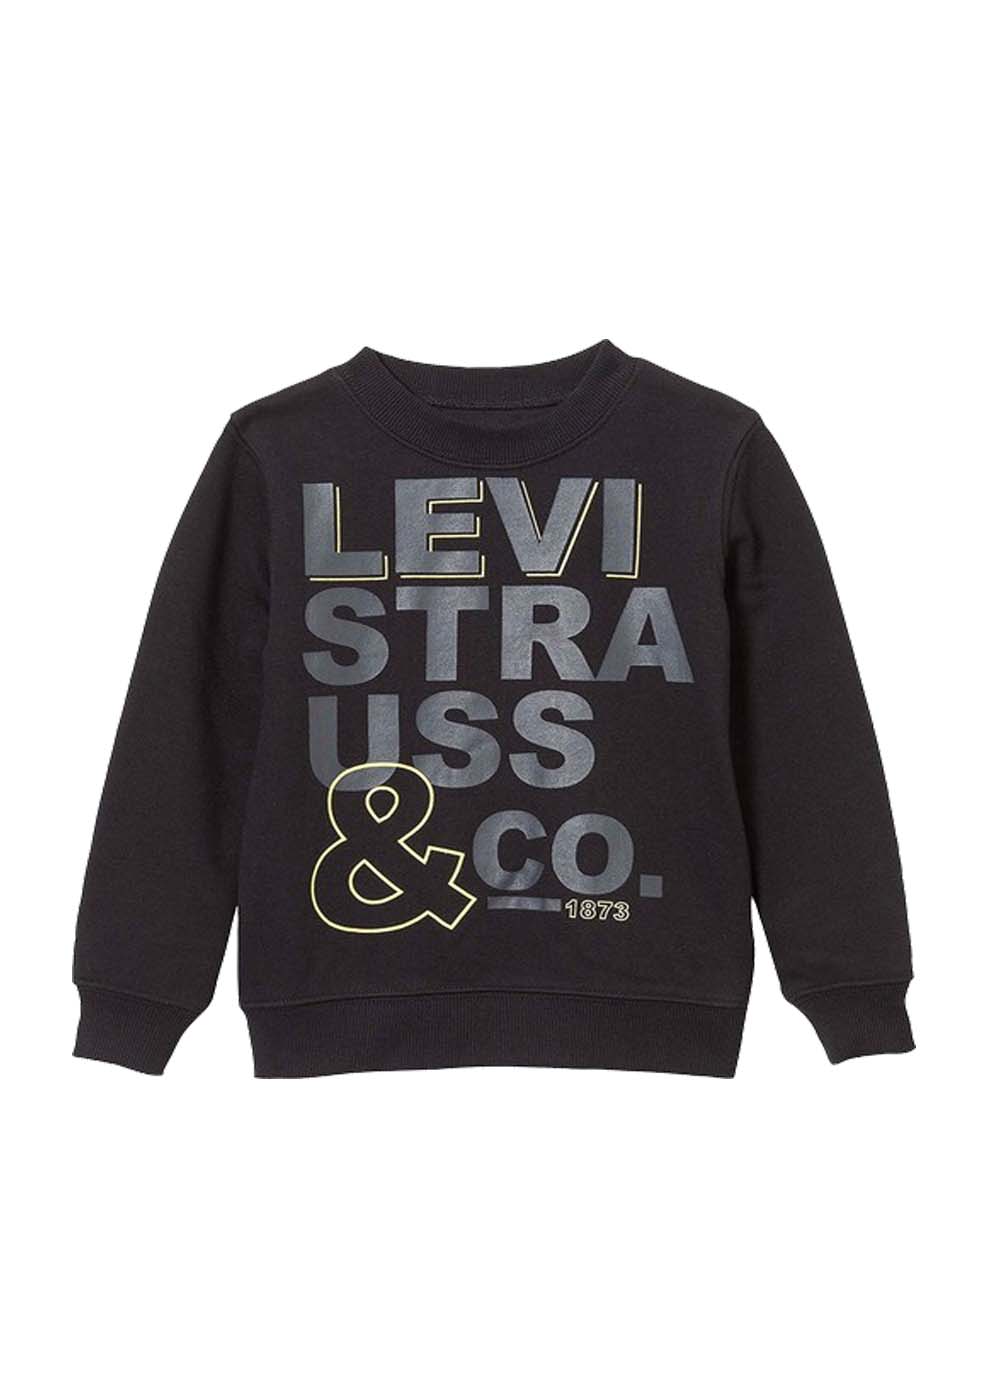 Featured image for “LEVI'S FELPA KIDS”